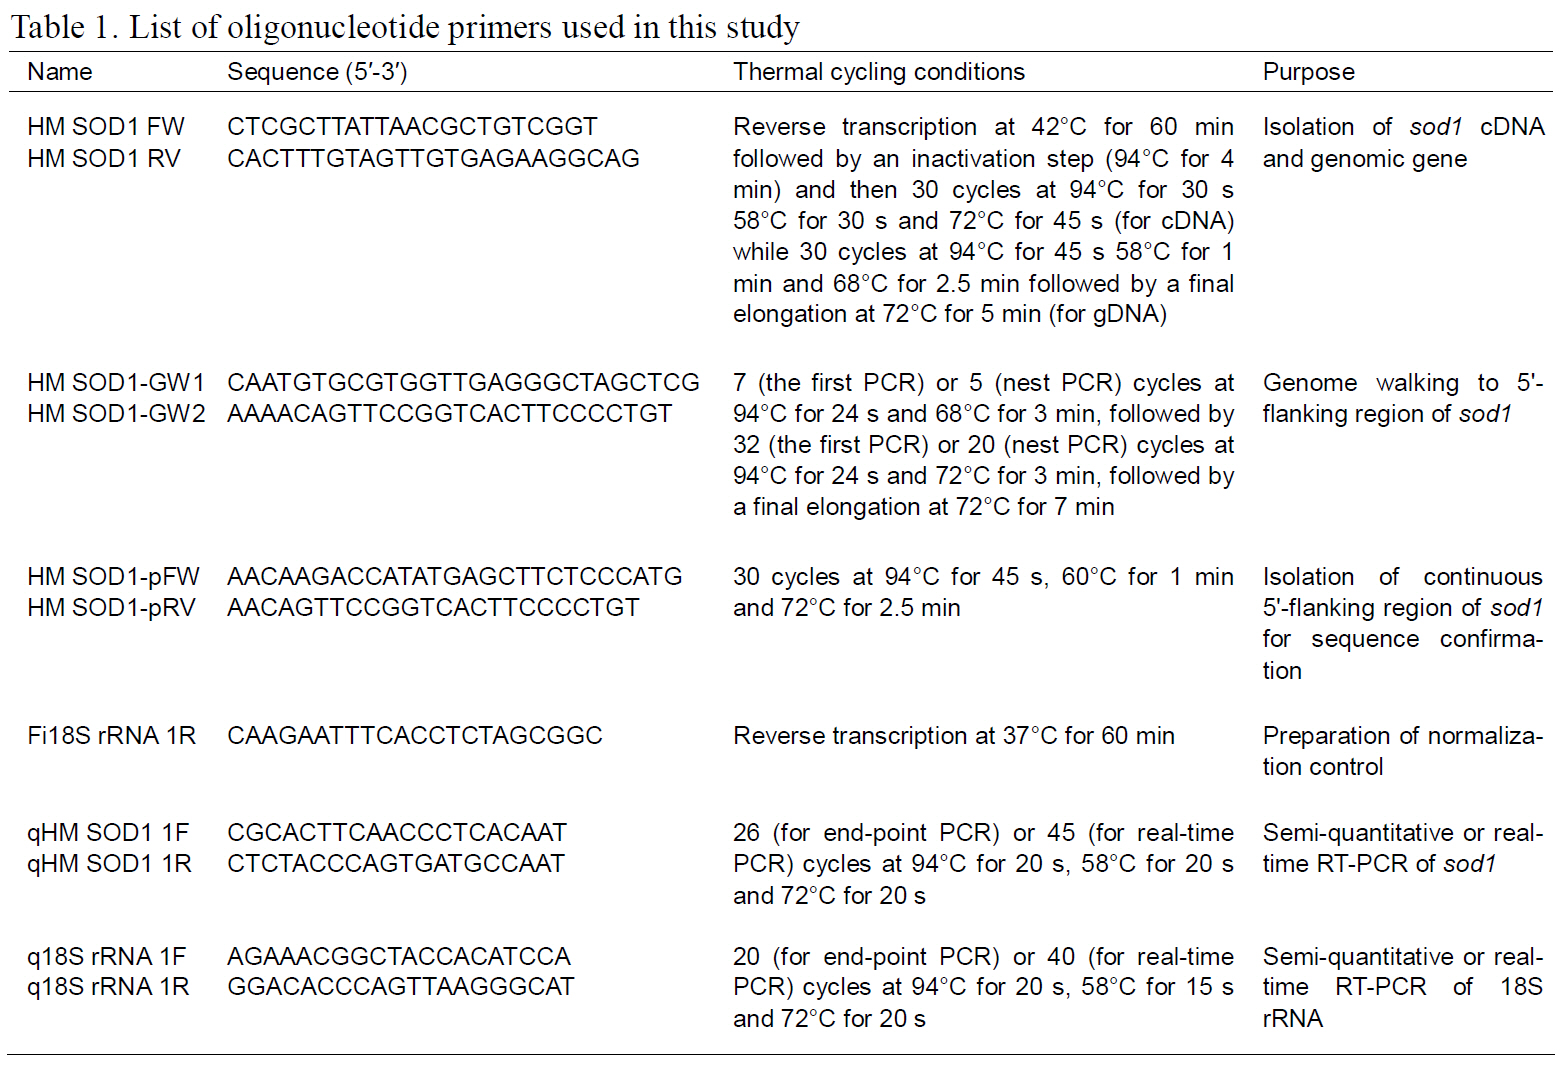 List of oligonucleotide primers used in this study